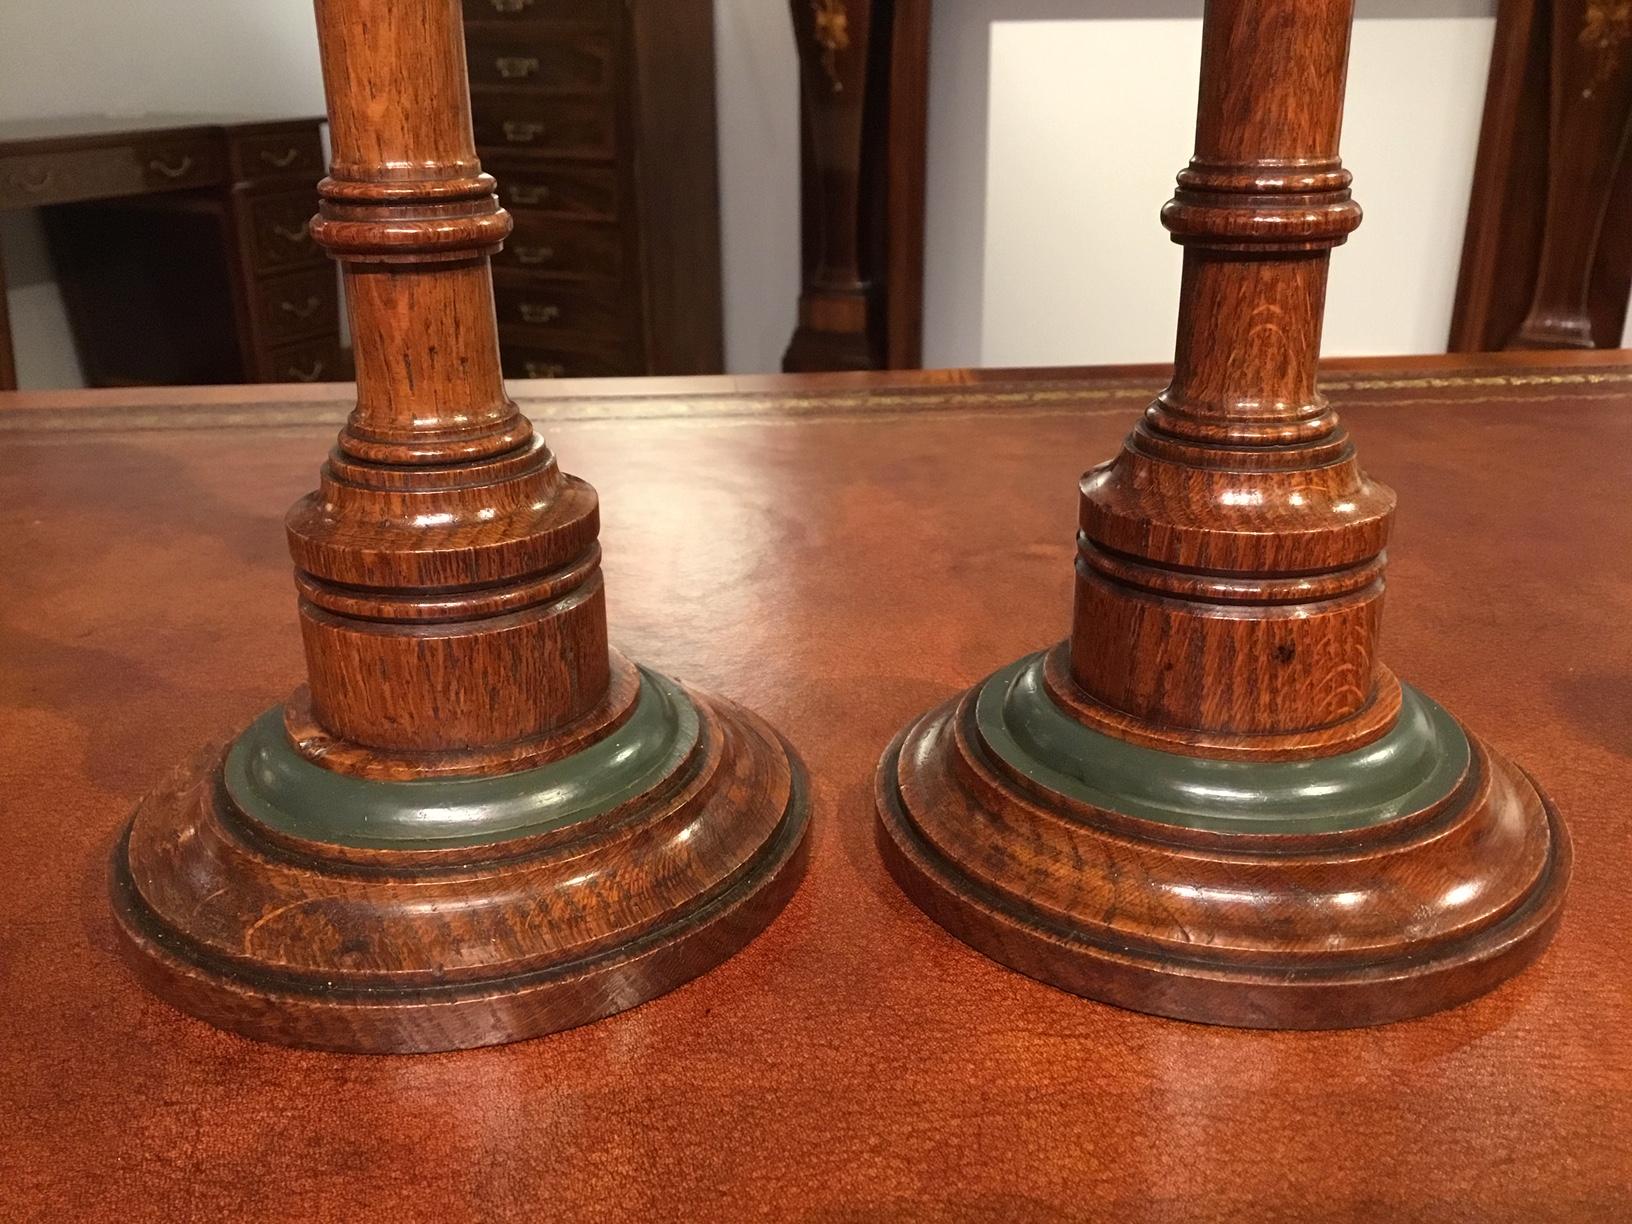 A lovely pair of 19th century Aesthetic period oak candle sticks. Each having a wonderful turned column with polychrome detail, supported on a lovely turned circular base with brass sconces. English, circa 1870-1880

Dimensions: 5